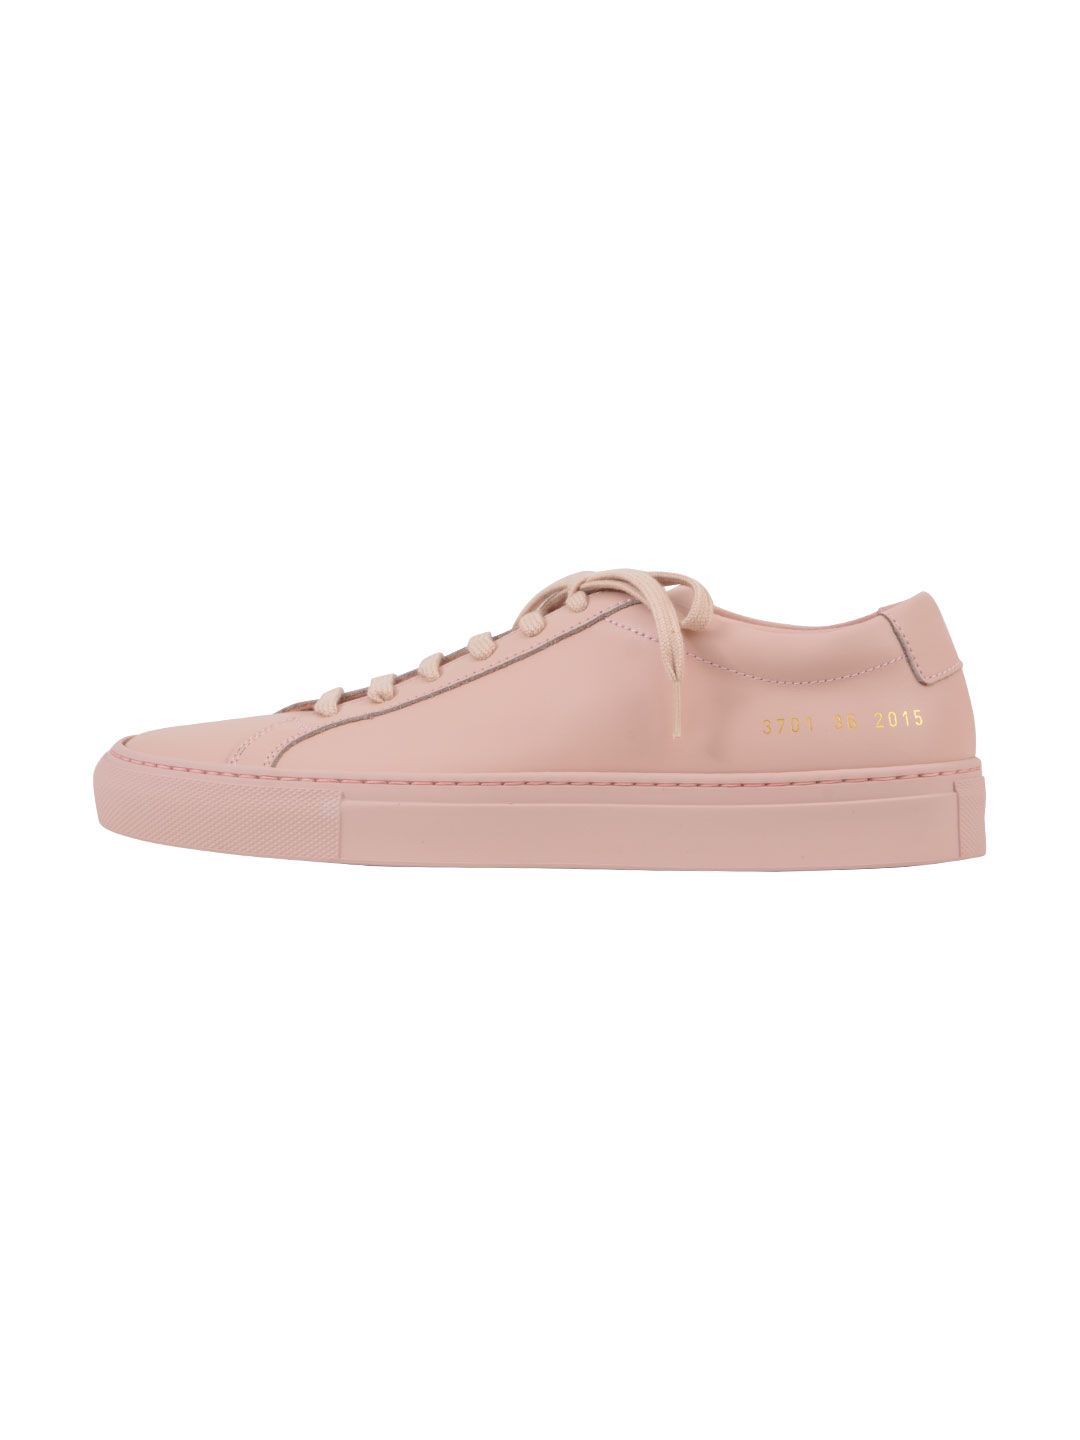 COMMON PROJECTS Original Achilles Low-Top Leather Trainers in Pink ...